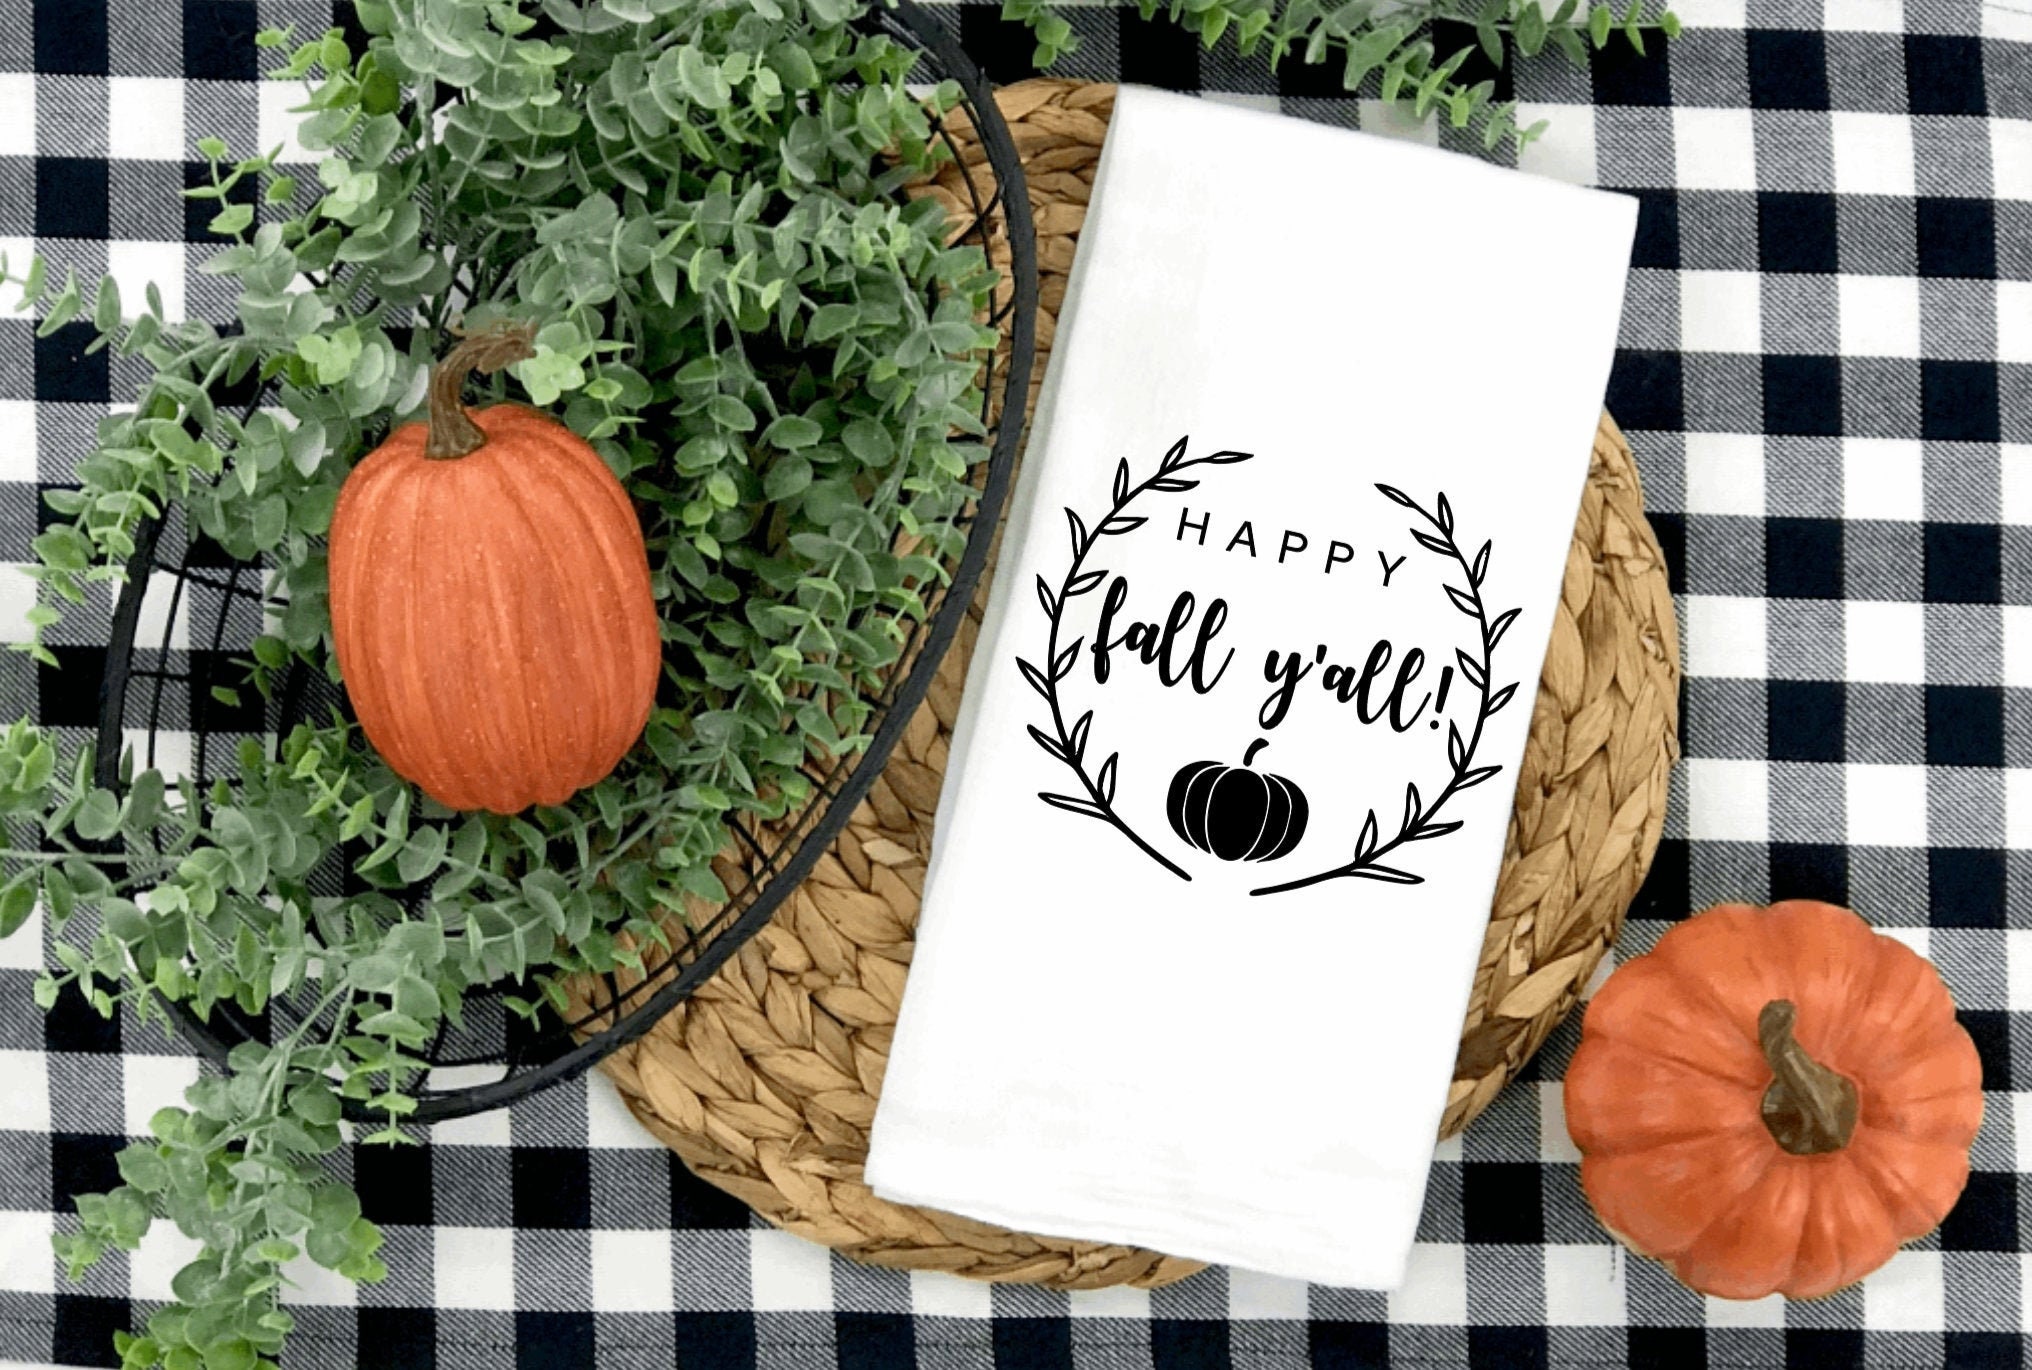 RTS Happy Fall Y'all Kitchen Tea Towels; Ready to Ship; Embroidered 20 x 28 Flour Sack Towel 100% Cotton